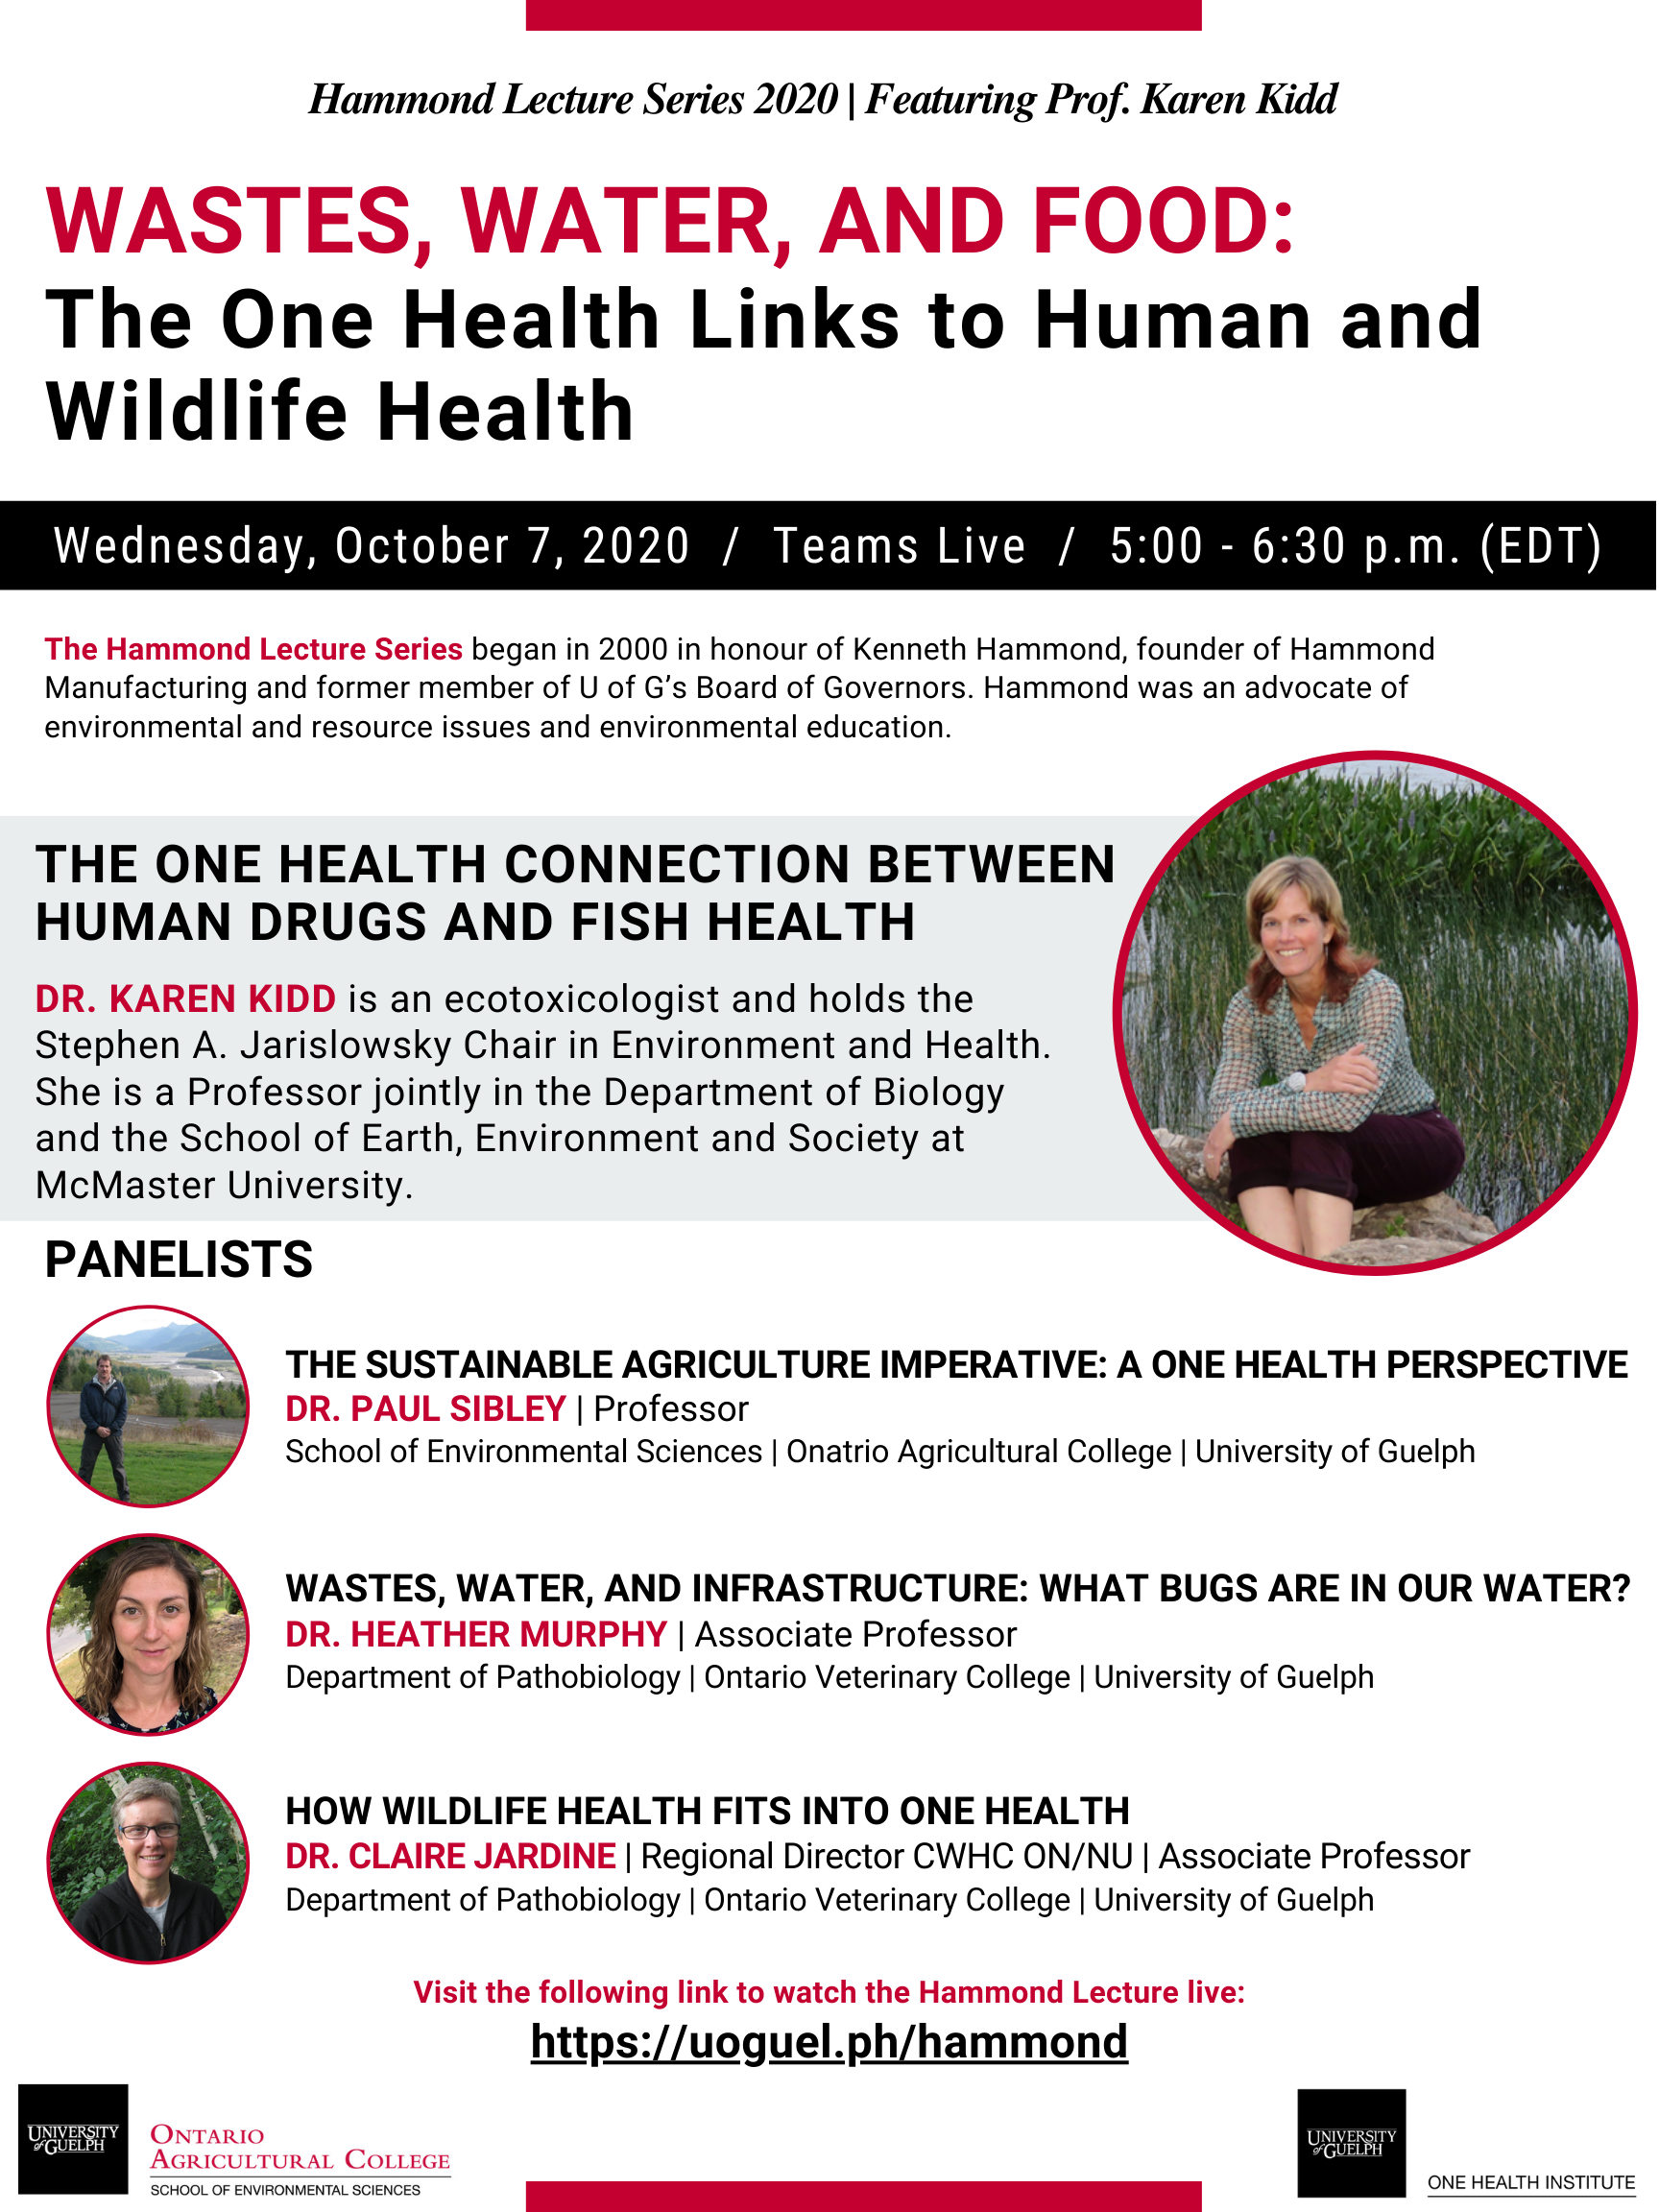 Poster Announcing: Hammond Lecture Series 2020 | Featuring Prof. Karen Kidd. Wastes, Water, and Food: The One Health Links to Human and Wildlife Health. Wednesday, October 7, 2020 /  Teams Live / 5:00-6:30p.m. (EDT). The Hammond Lecture Series began in 2000 in honour of Kenneth Hammond, founder of Hammond Manufacturing and former member of U of G's Board of Governors. Hammond was an advocate of environmental and resource issues and environmental education. The One Health Connection Between Human Drugs and Fish Health - Dr. Karen Kidd is an ecotoxicologist and hold the Stephen A. Jarislowsky Chair in Environment and Health. She is a Professor jointly in the Department of Biology and the School of Earth, Environment and Society at McMaster University. (Photo of Dr. Kidd near water with tall grasses). Panelists - Dr. Paul Sibley (Professor, School of Environmental Sciences, Ontario Agricultural College, University of Guelph) The Sustainable Agriculture Imperative: A One Health Perspective (photo of Dr. Sibley), Dr. Heather Murphy (Associate Professor, Department of Pathobiology, Ontario Veterinary College, University of Guelph) Wastes, Water, and Infrastructure: What Bugs are in Our Water? (Photo of Dr. Murphy), Dr. Claire Jardine (Regional Director CWHC ON/NU, Associate Professor, Department of Pathobiology, Ontario Veterinary College, University of Guelph) How Wildlife Health Fits into One Health (Photo of Dr. Jardine). Visit the following link to watch the Hammond Lecture live: https://uoguel.ph/hammond. Ontario Agricultural College School of Environmental Sciences logo and One Health Institute logo.